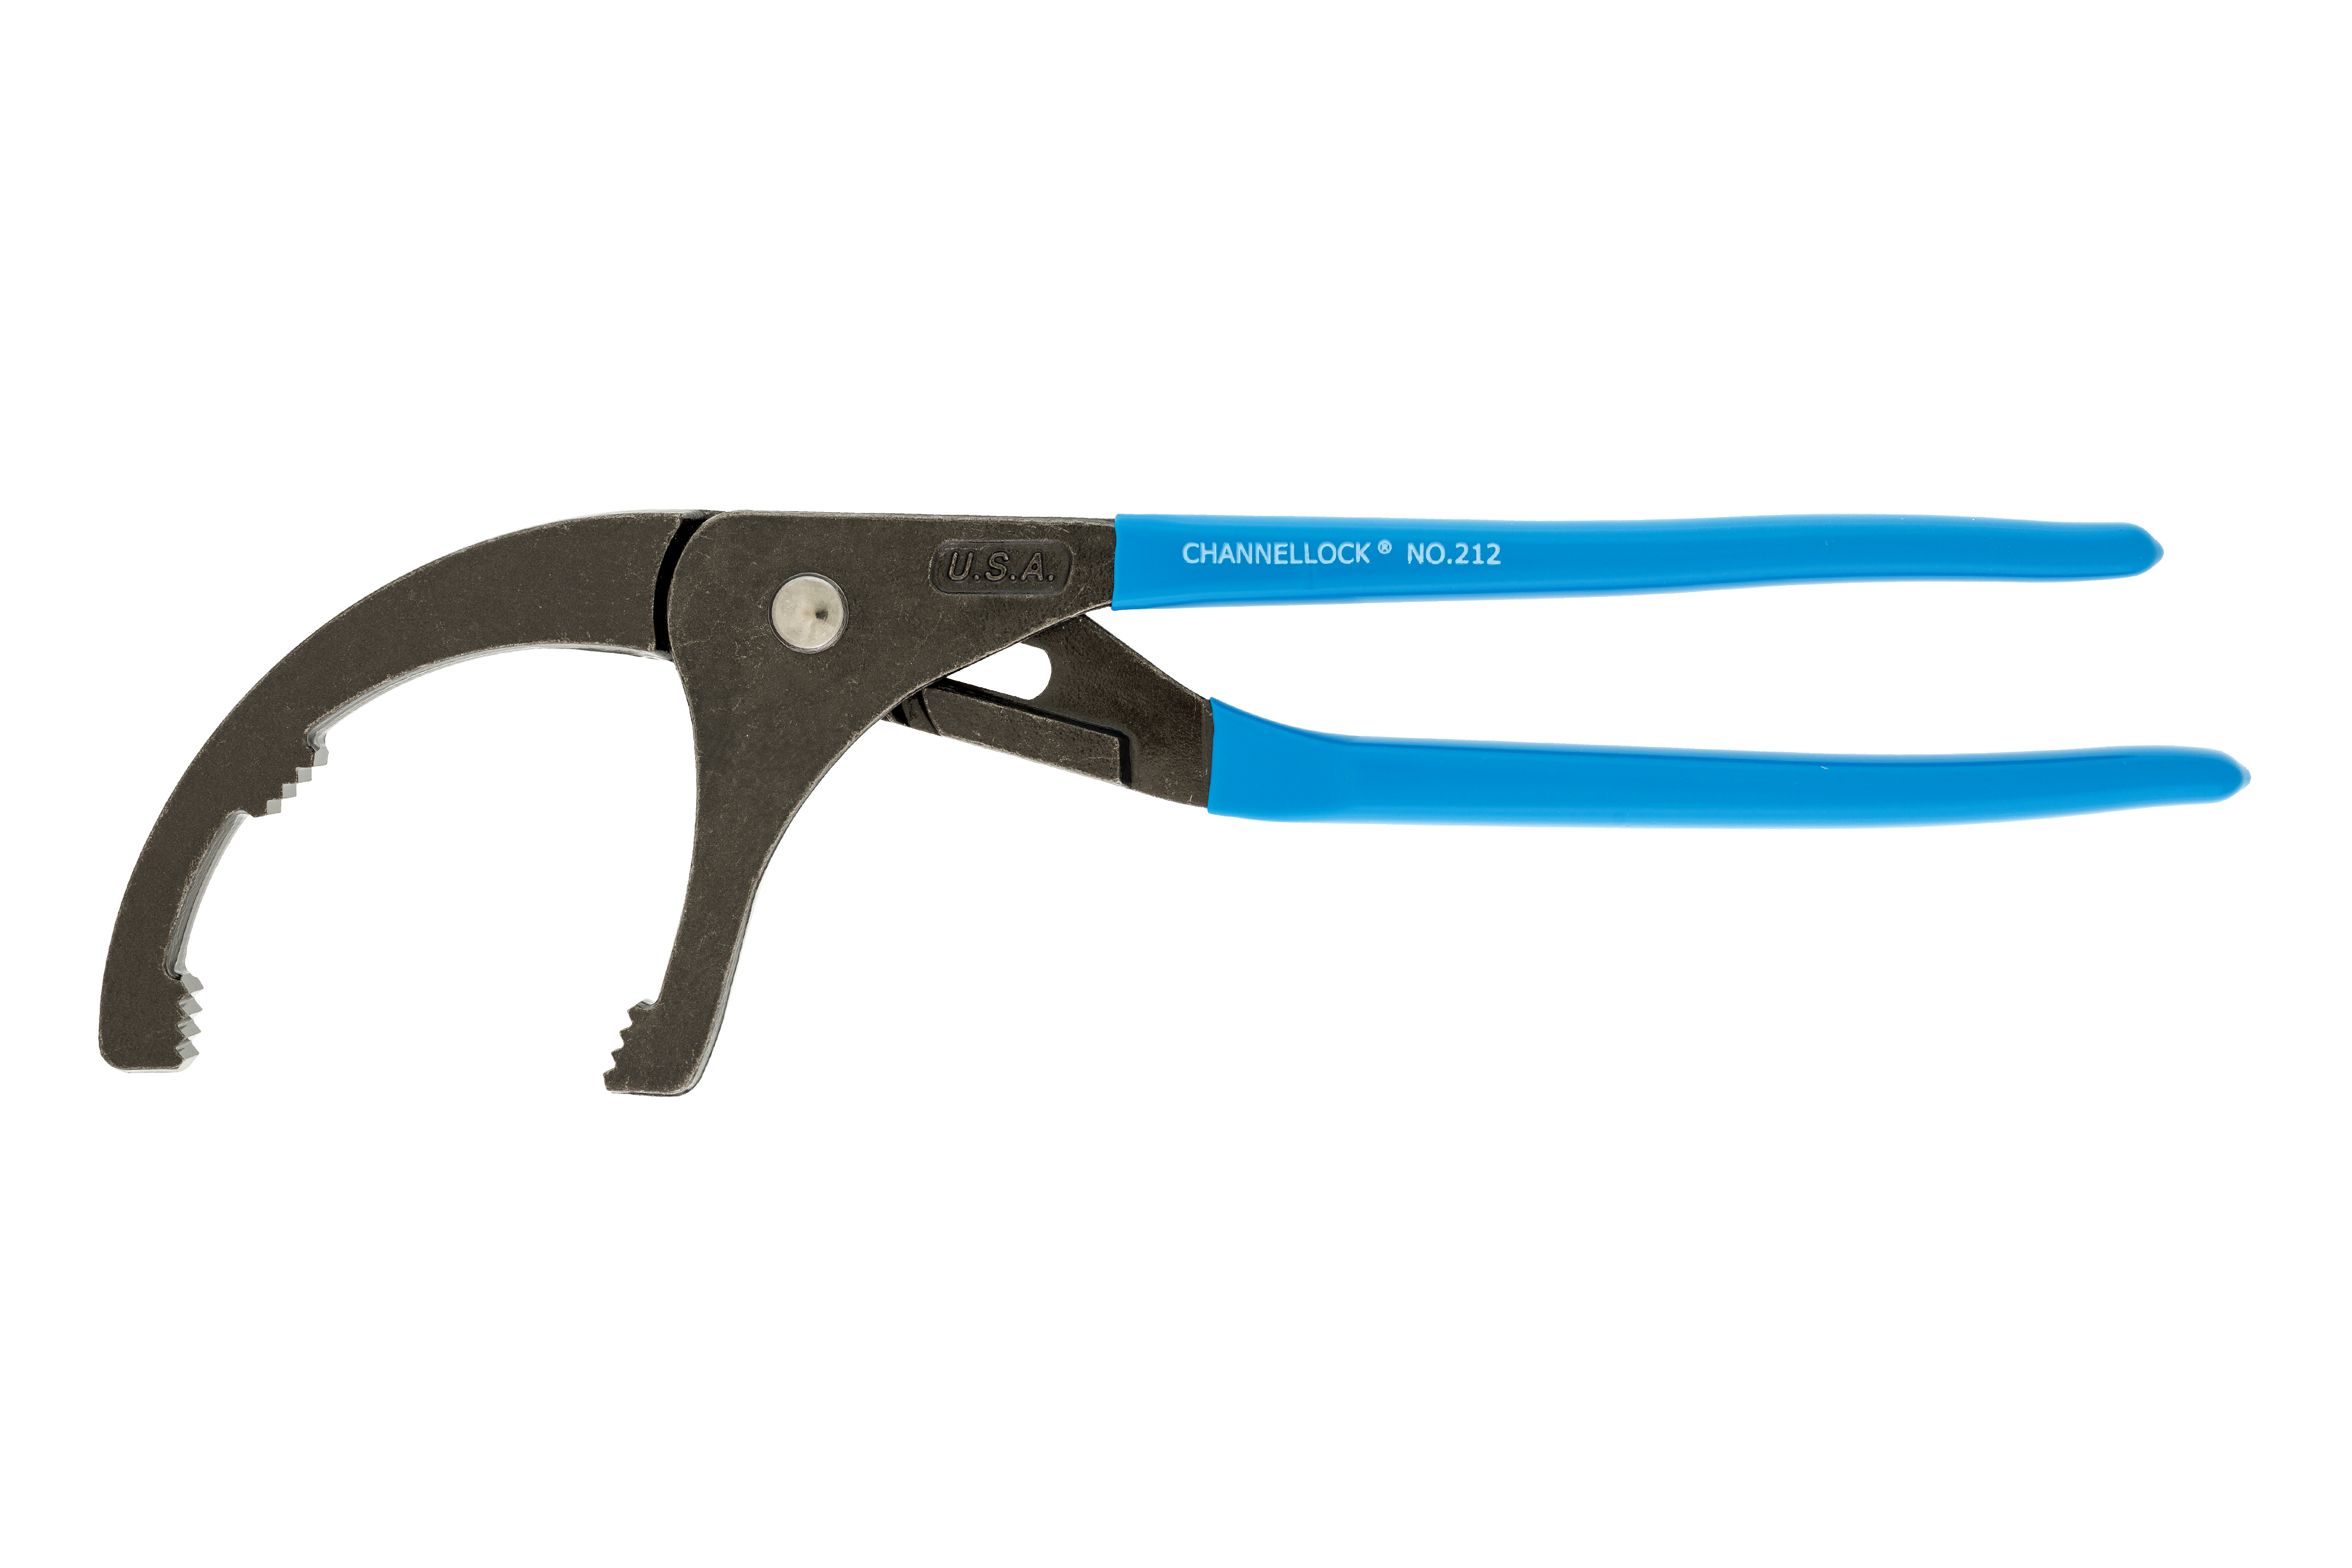 CHANNELLOCK 212 Oil Filter Plier, 12 in OAL, 4-1/4 in Jaw Opening, Blue Handle, Comfort-Grip Handle, 2-1/2 in L Jaw